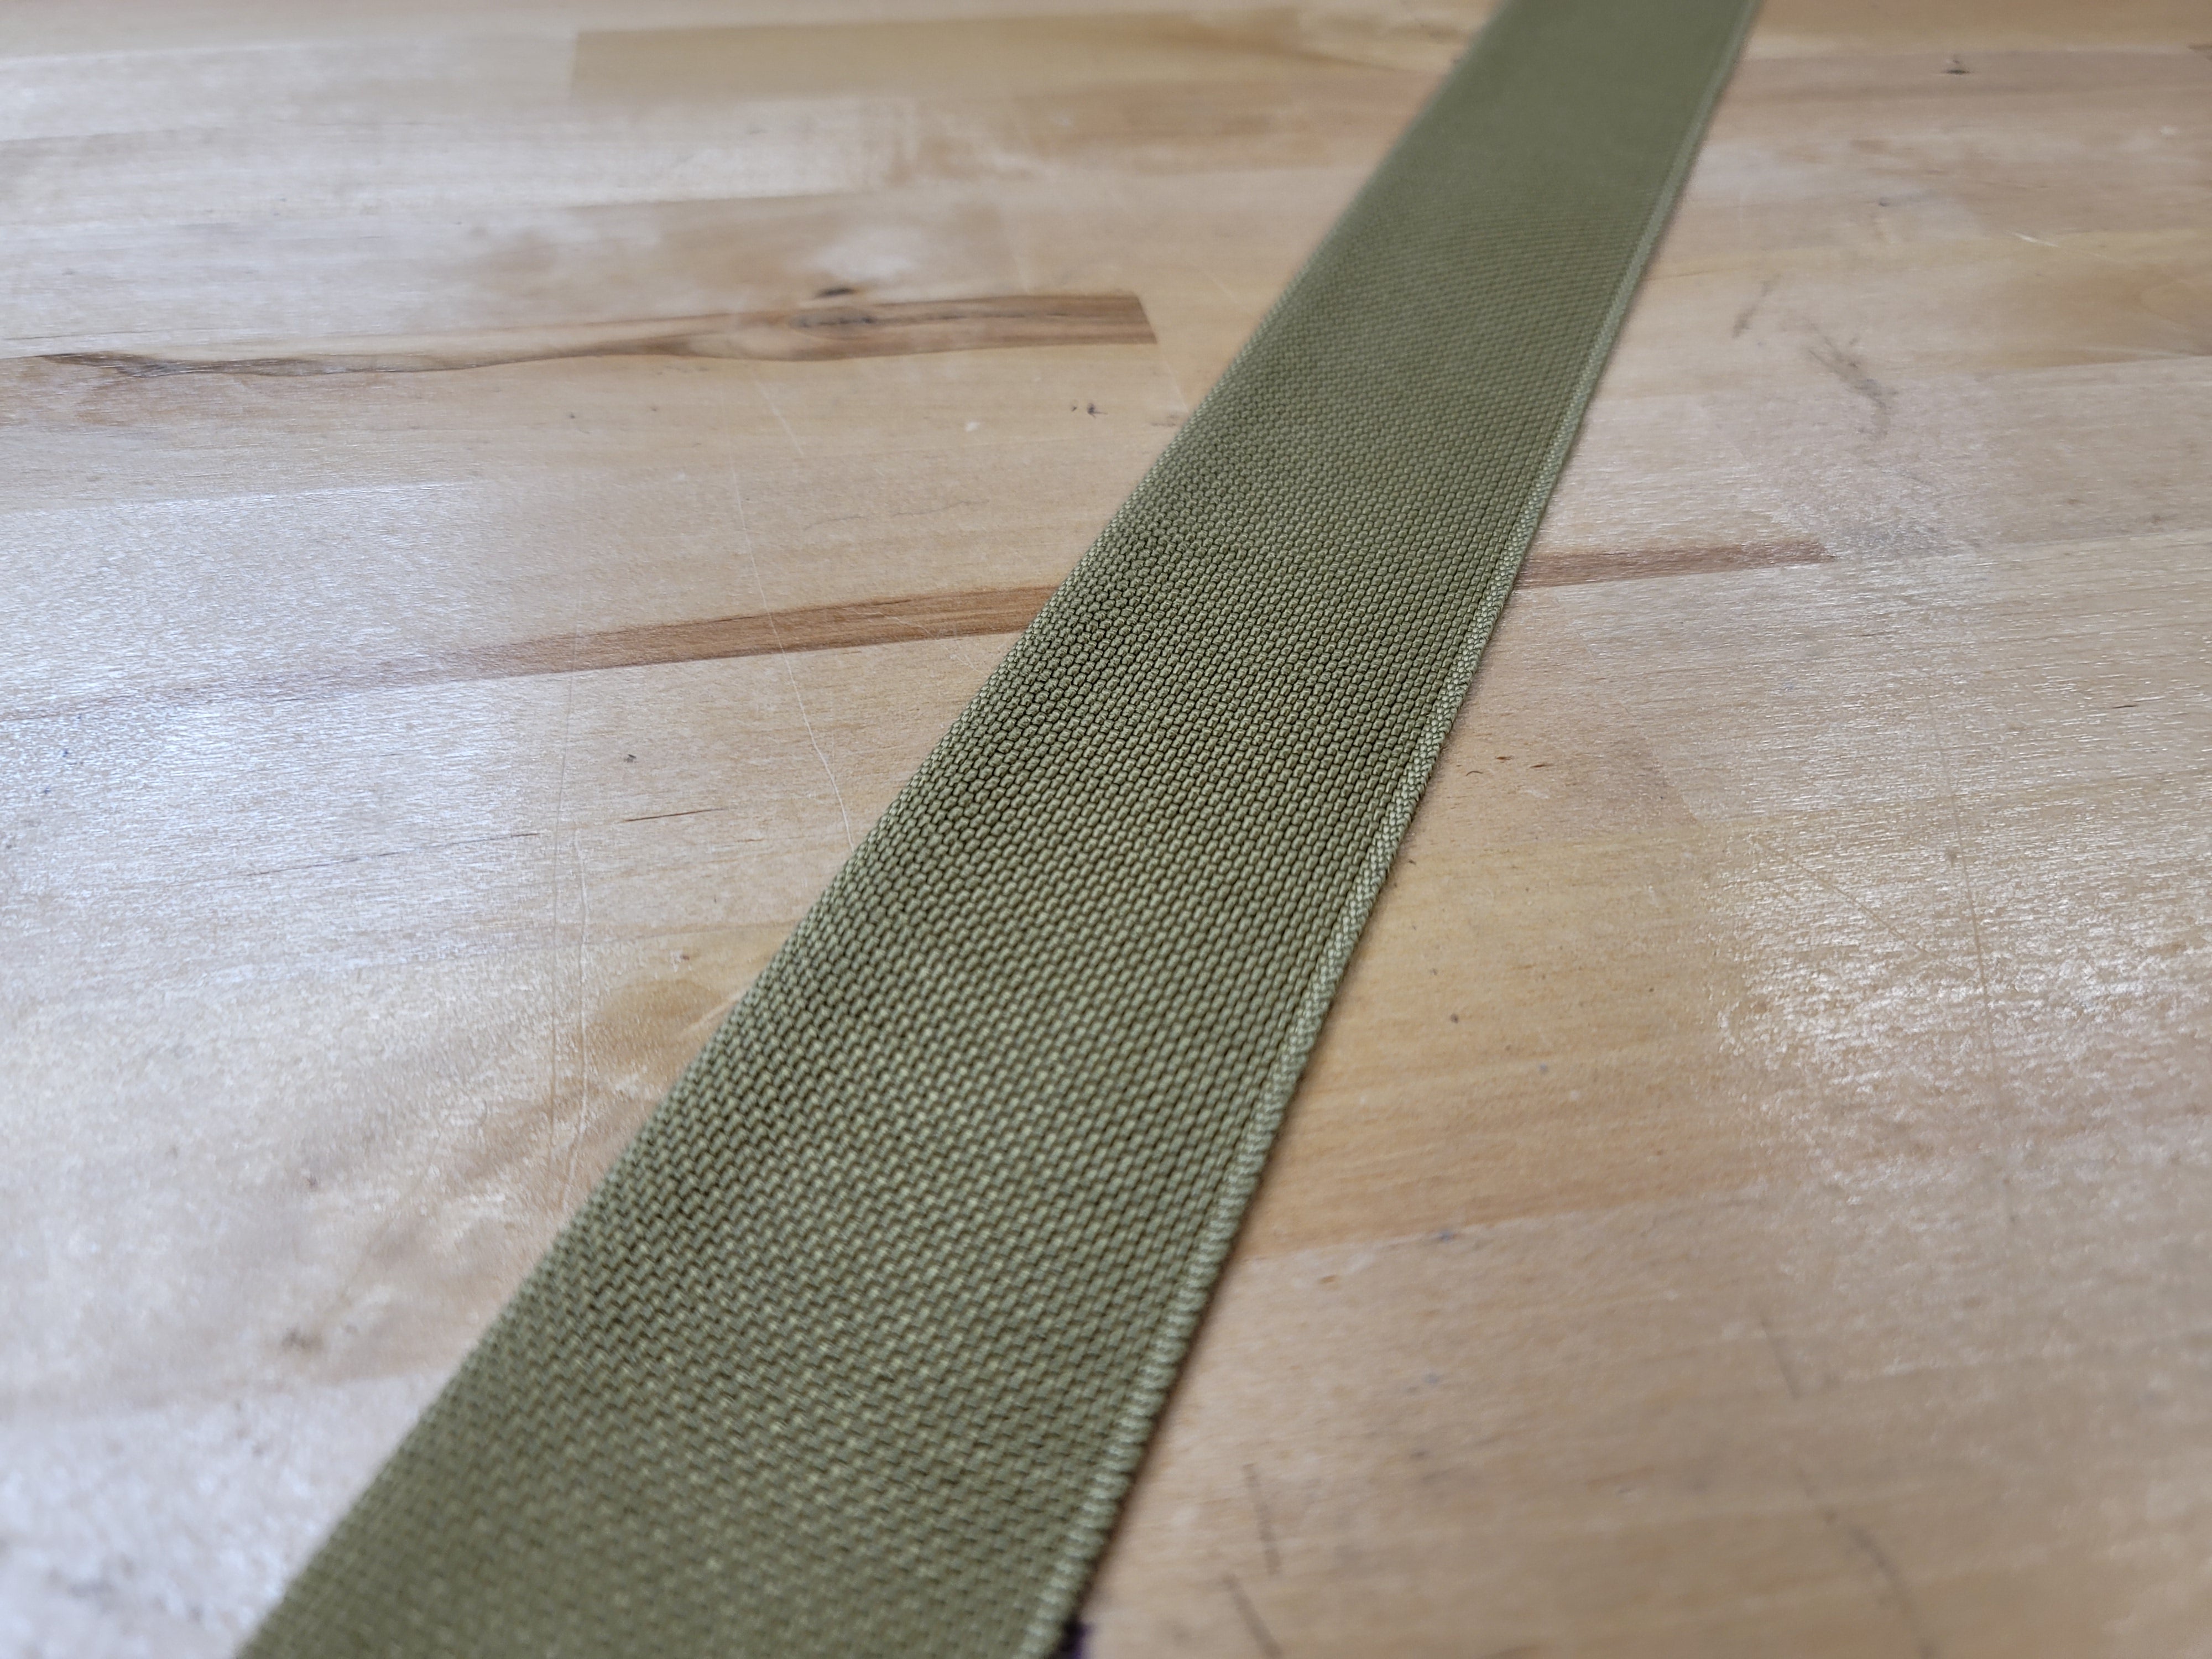 2 inch Coyote Webbing A-A-55301 Type 3 Class 2 – A&A Tactical